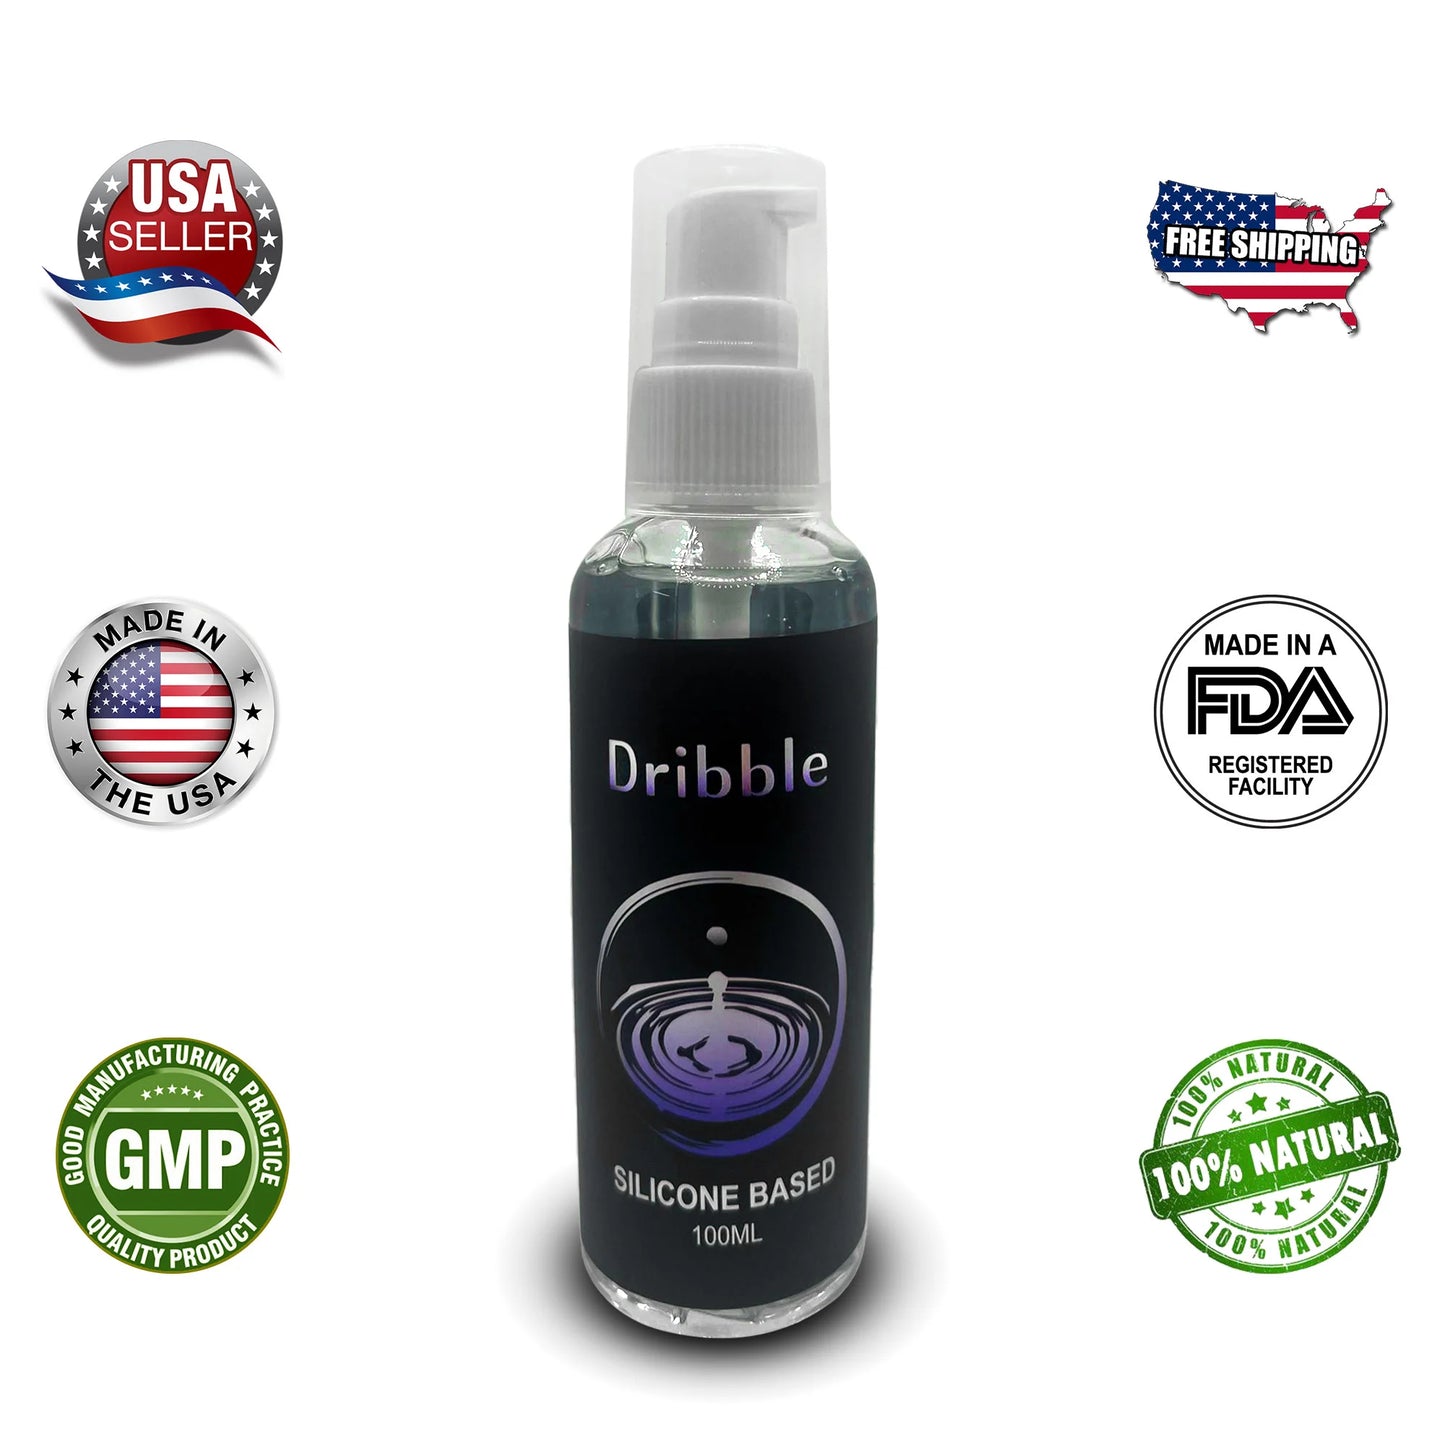 Dribble Silicone Based Lube Ultra Long Lasting Personal Luxury Lubric Organic Fuel